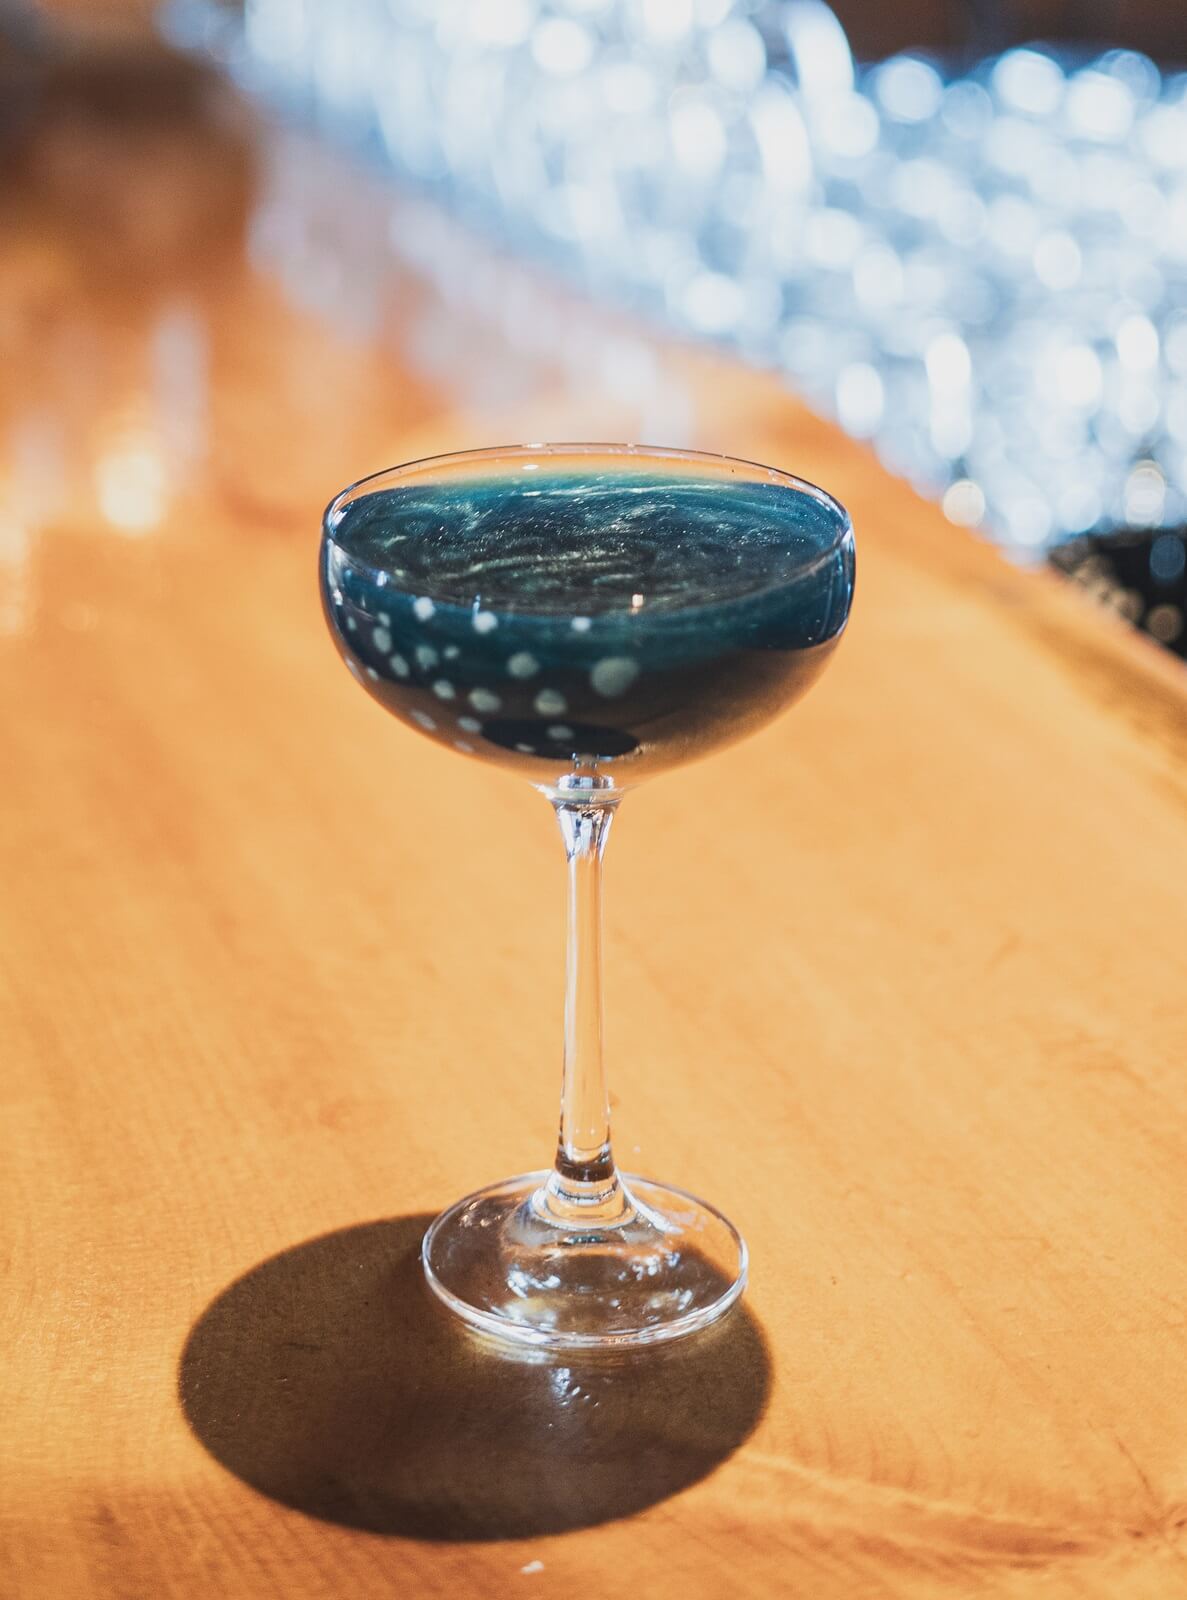 A Starry night cocktail in honour of Hotel Rangá observatory 10 year a anniversary